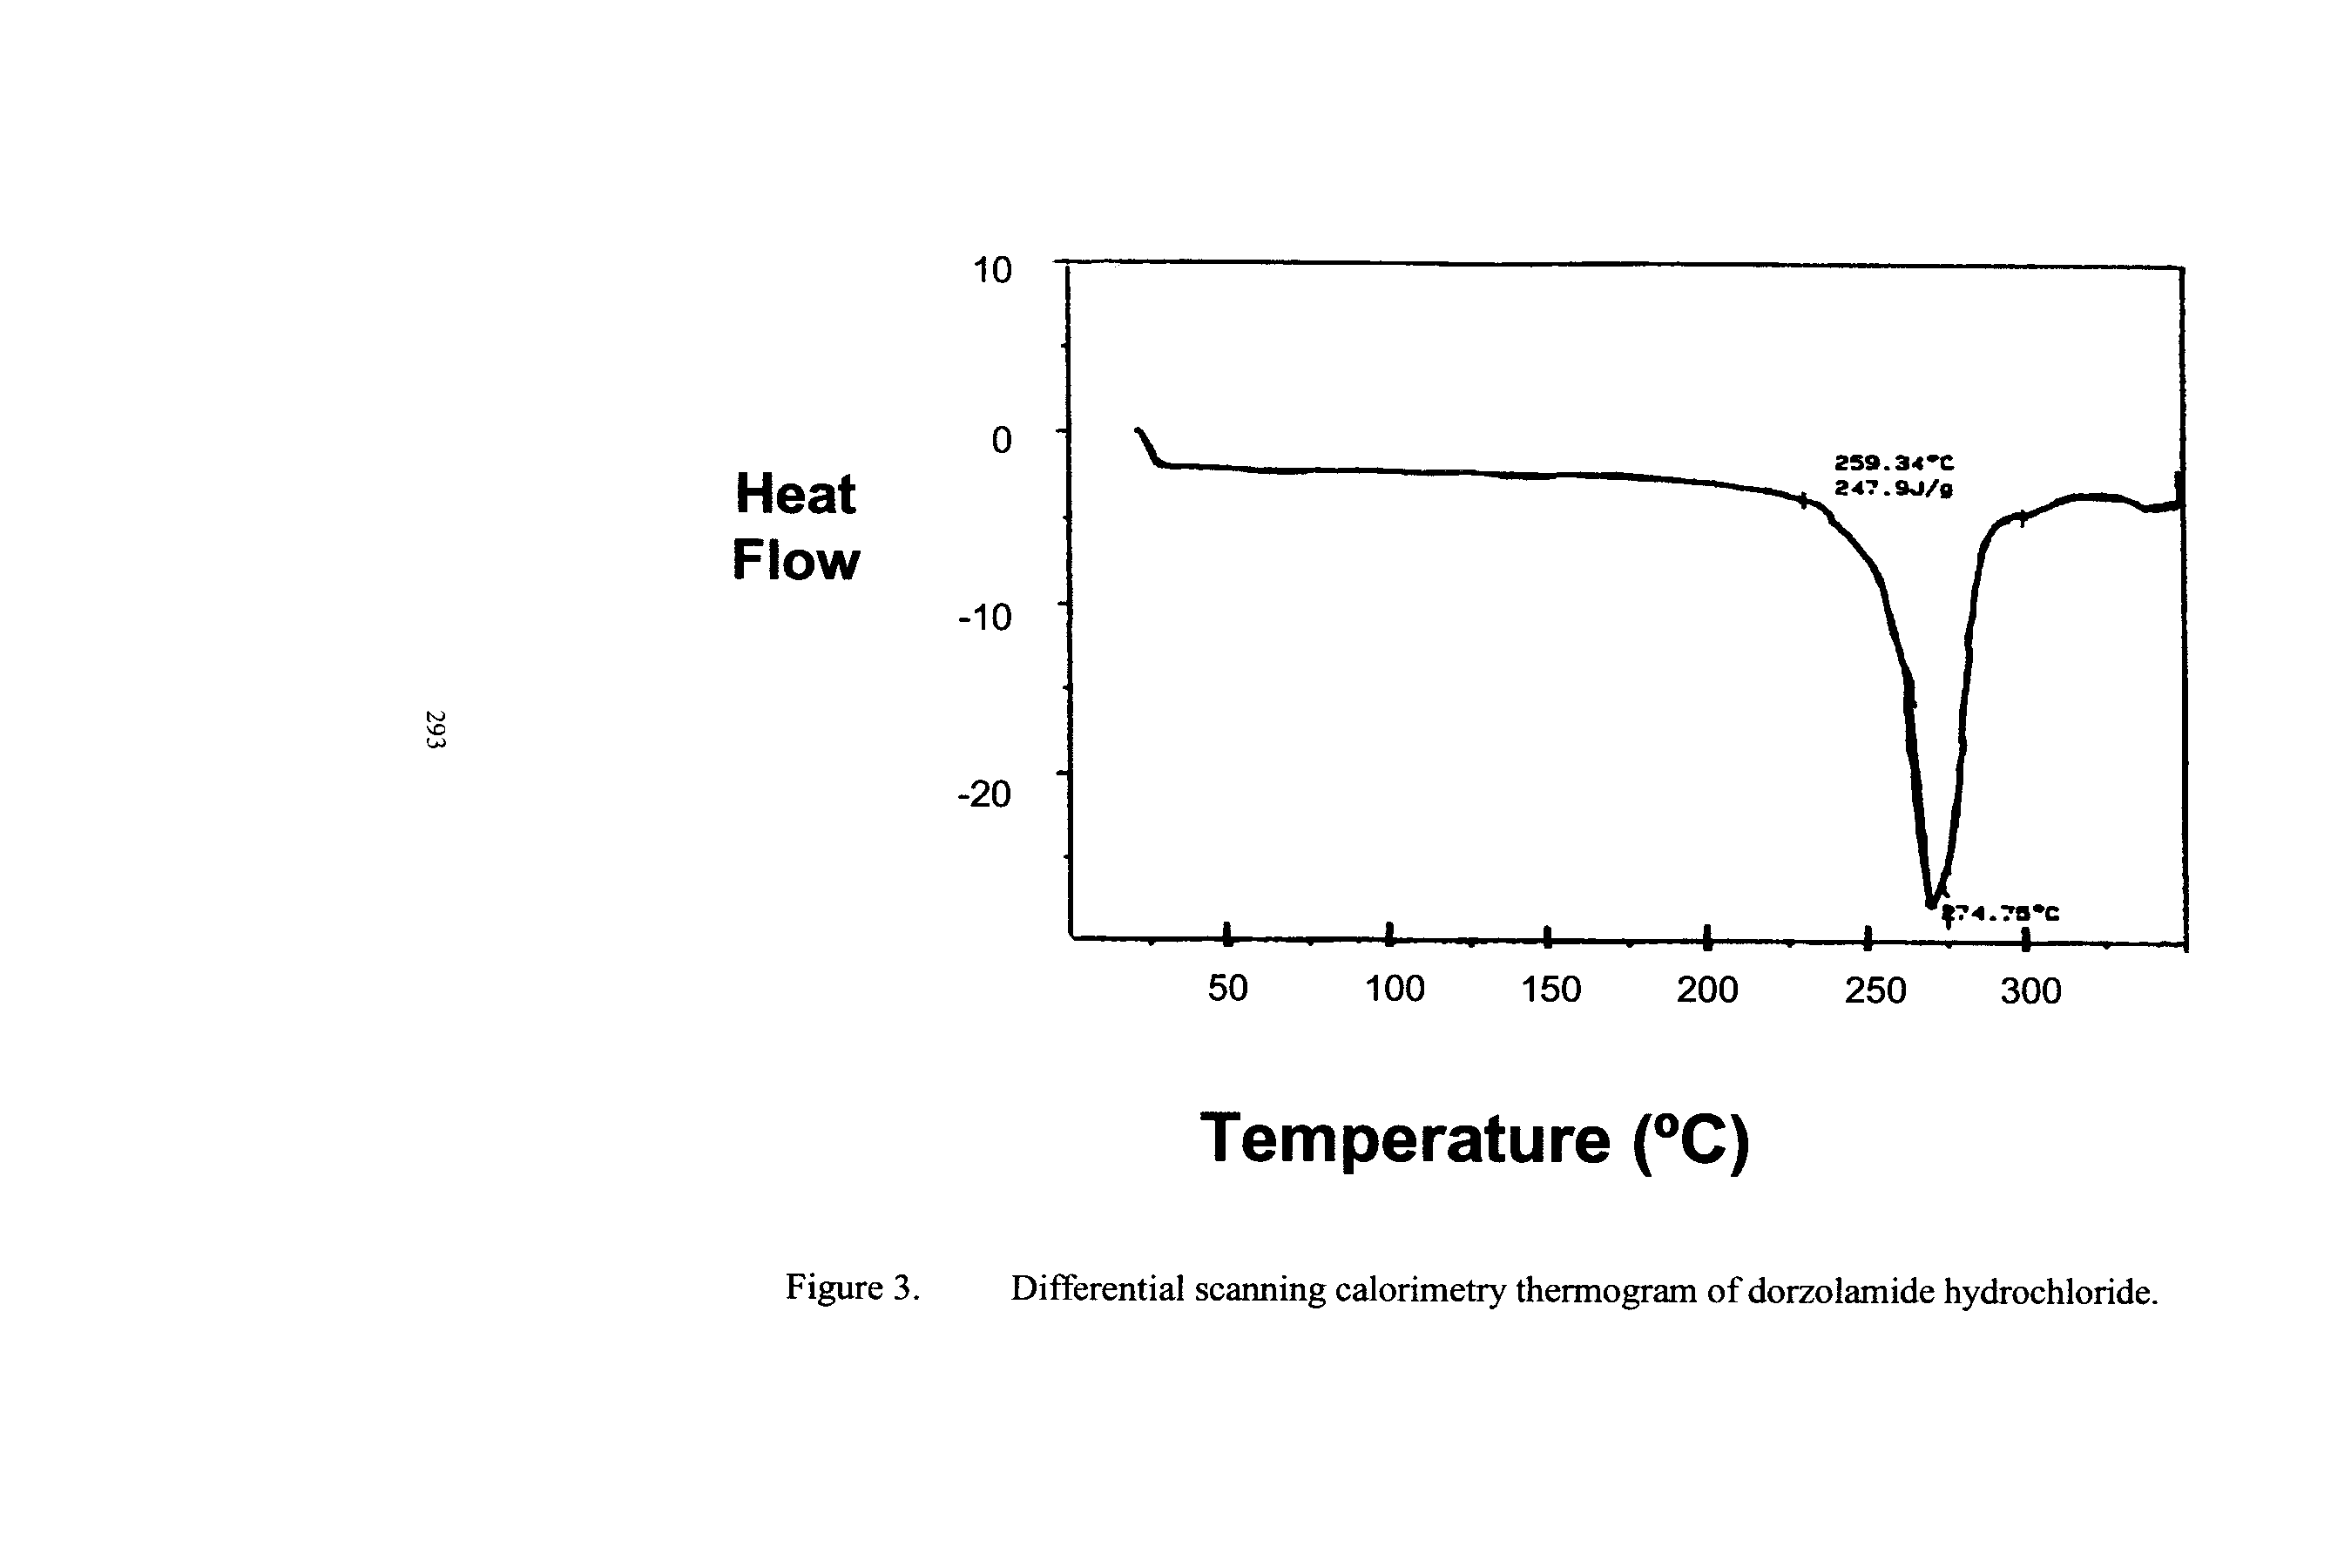 Figure 3. Differential scanning calorimetry thermogram of dorzolamide hydrochloride.